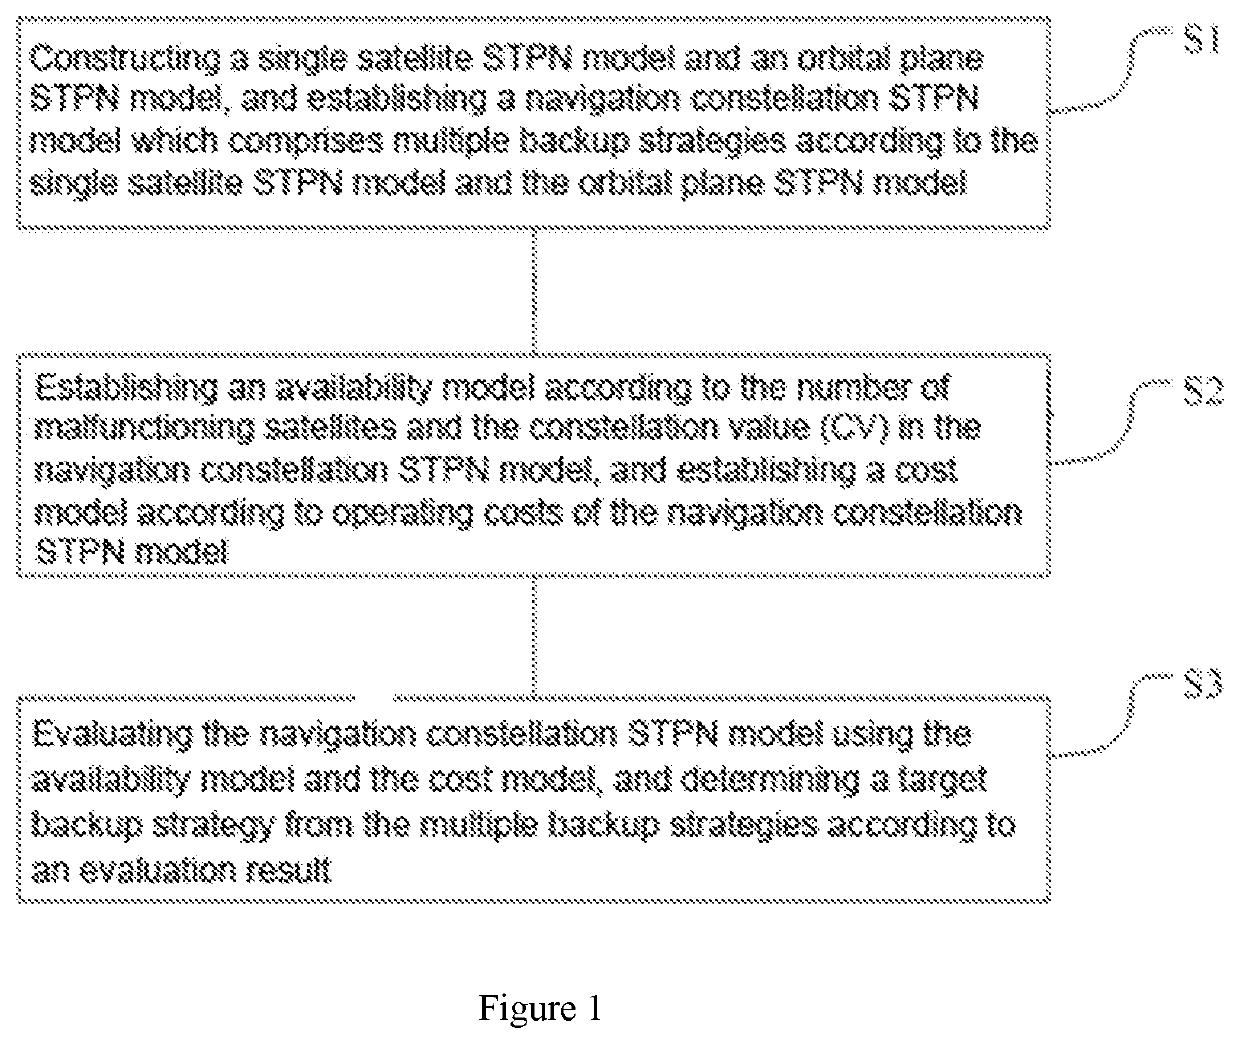 Method and system of evaluating a constellation spare strategy based on a stochastic time petri net